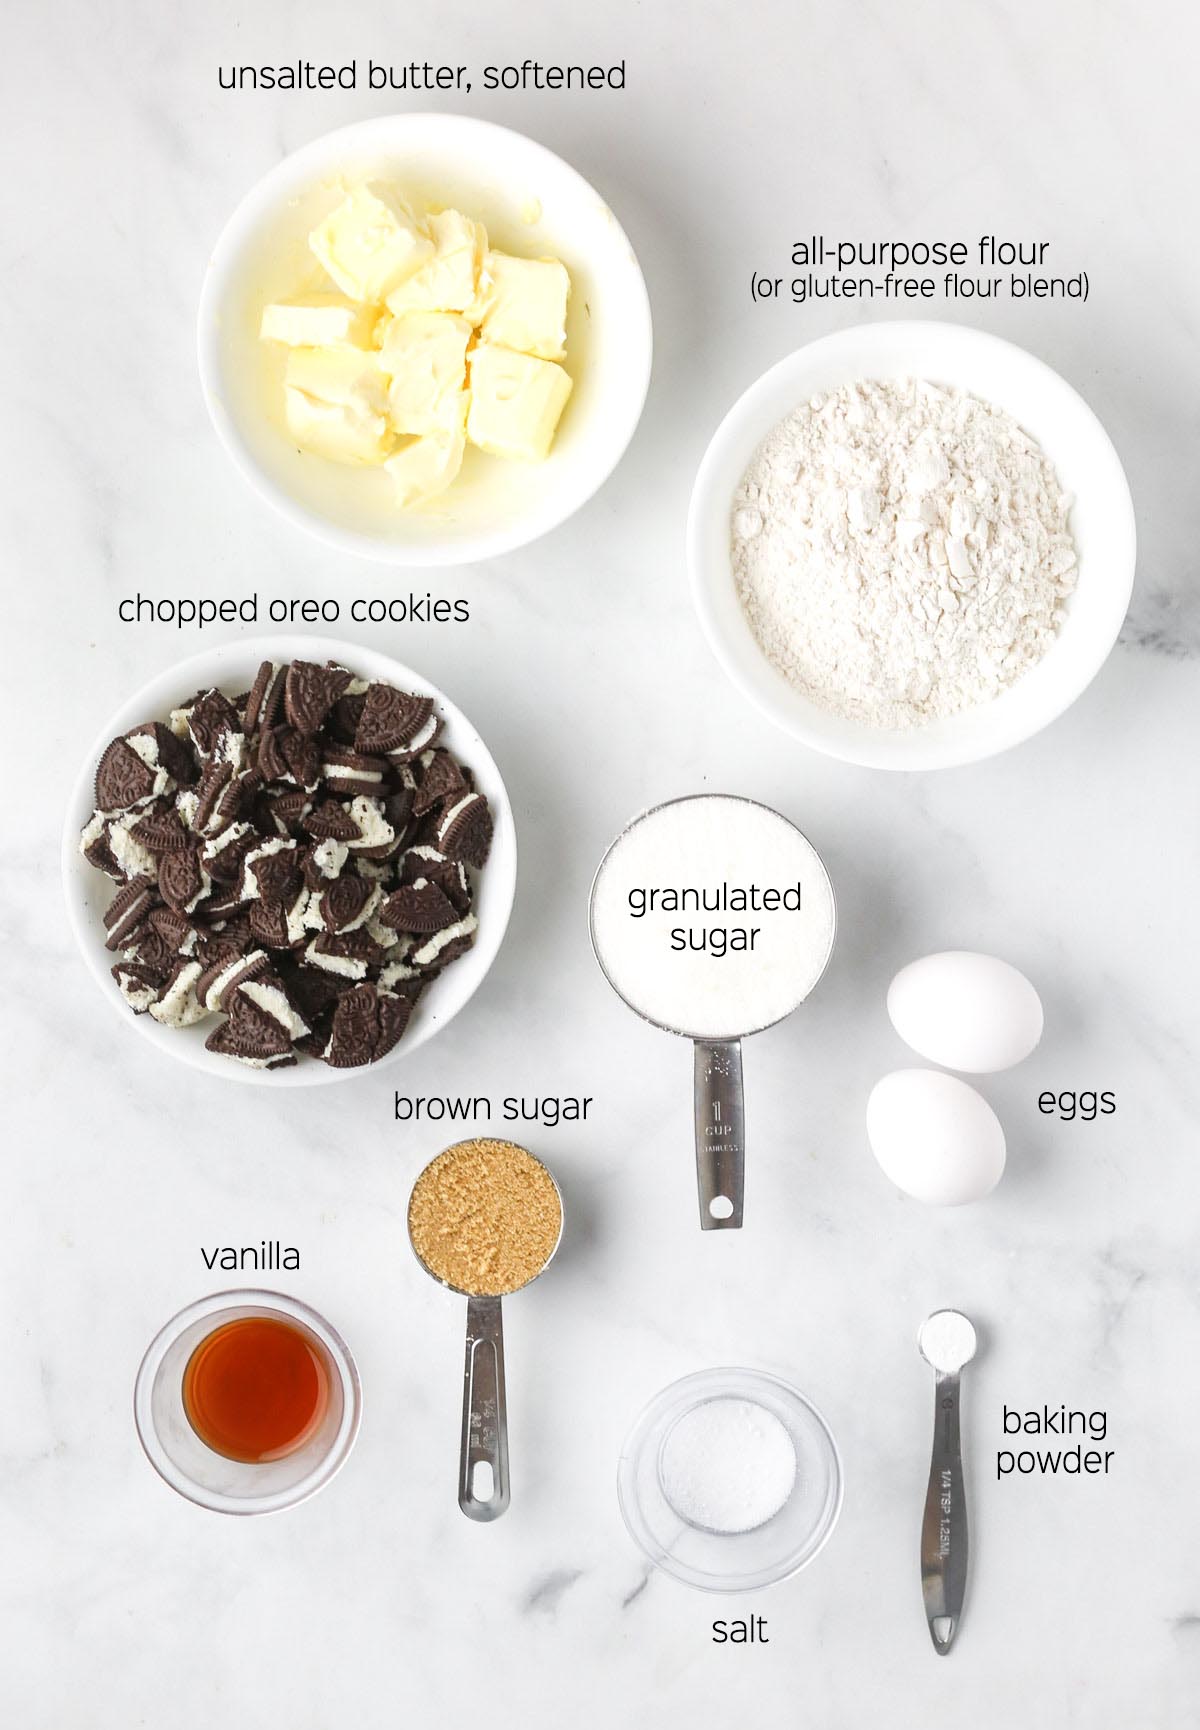 all ingredients to make the blondies prepared in white bowls, shown from on a marble surface.